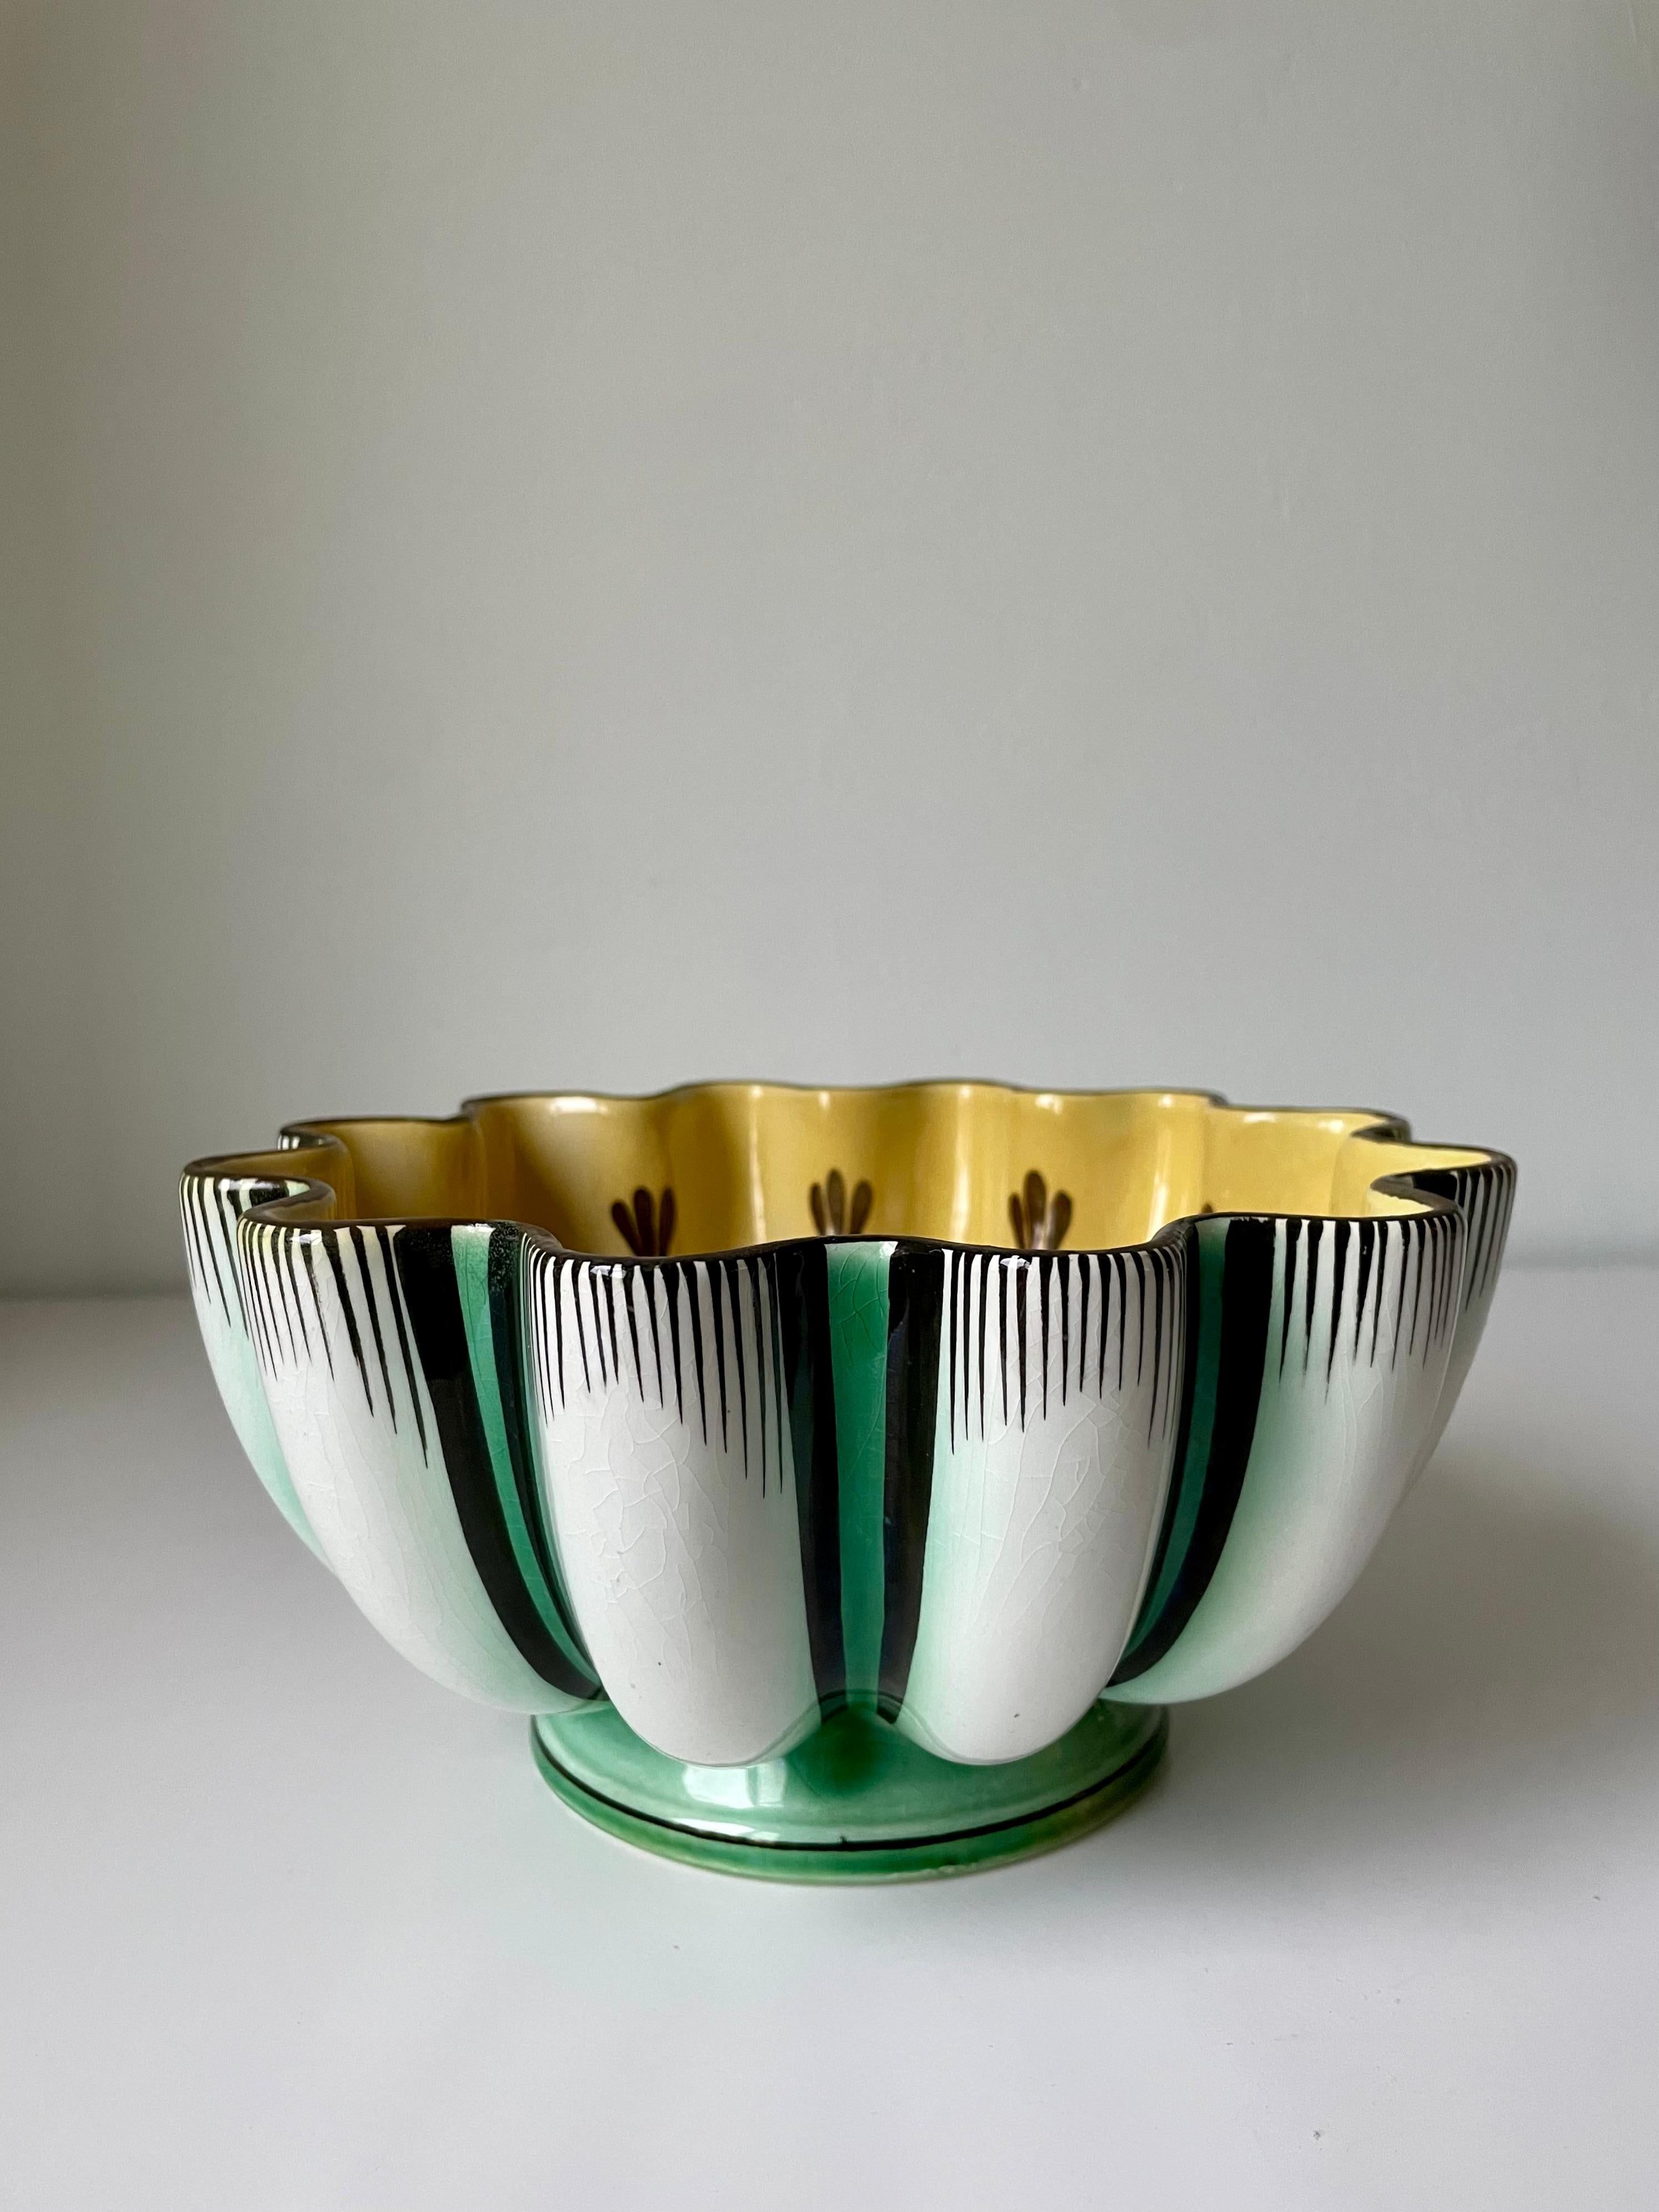 20th Century Arthur Percy Hand-Painted 1920s Wavy Bowl, Sweden For Sale